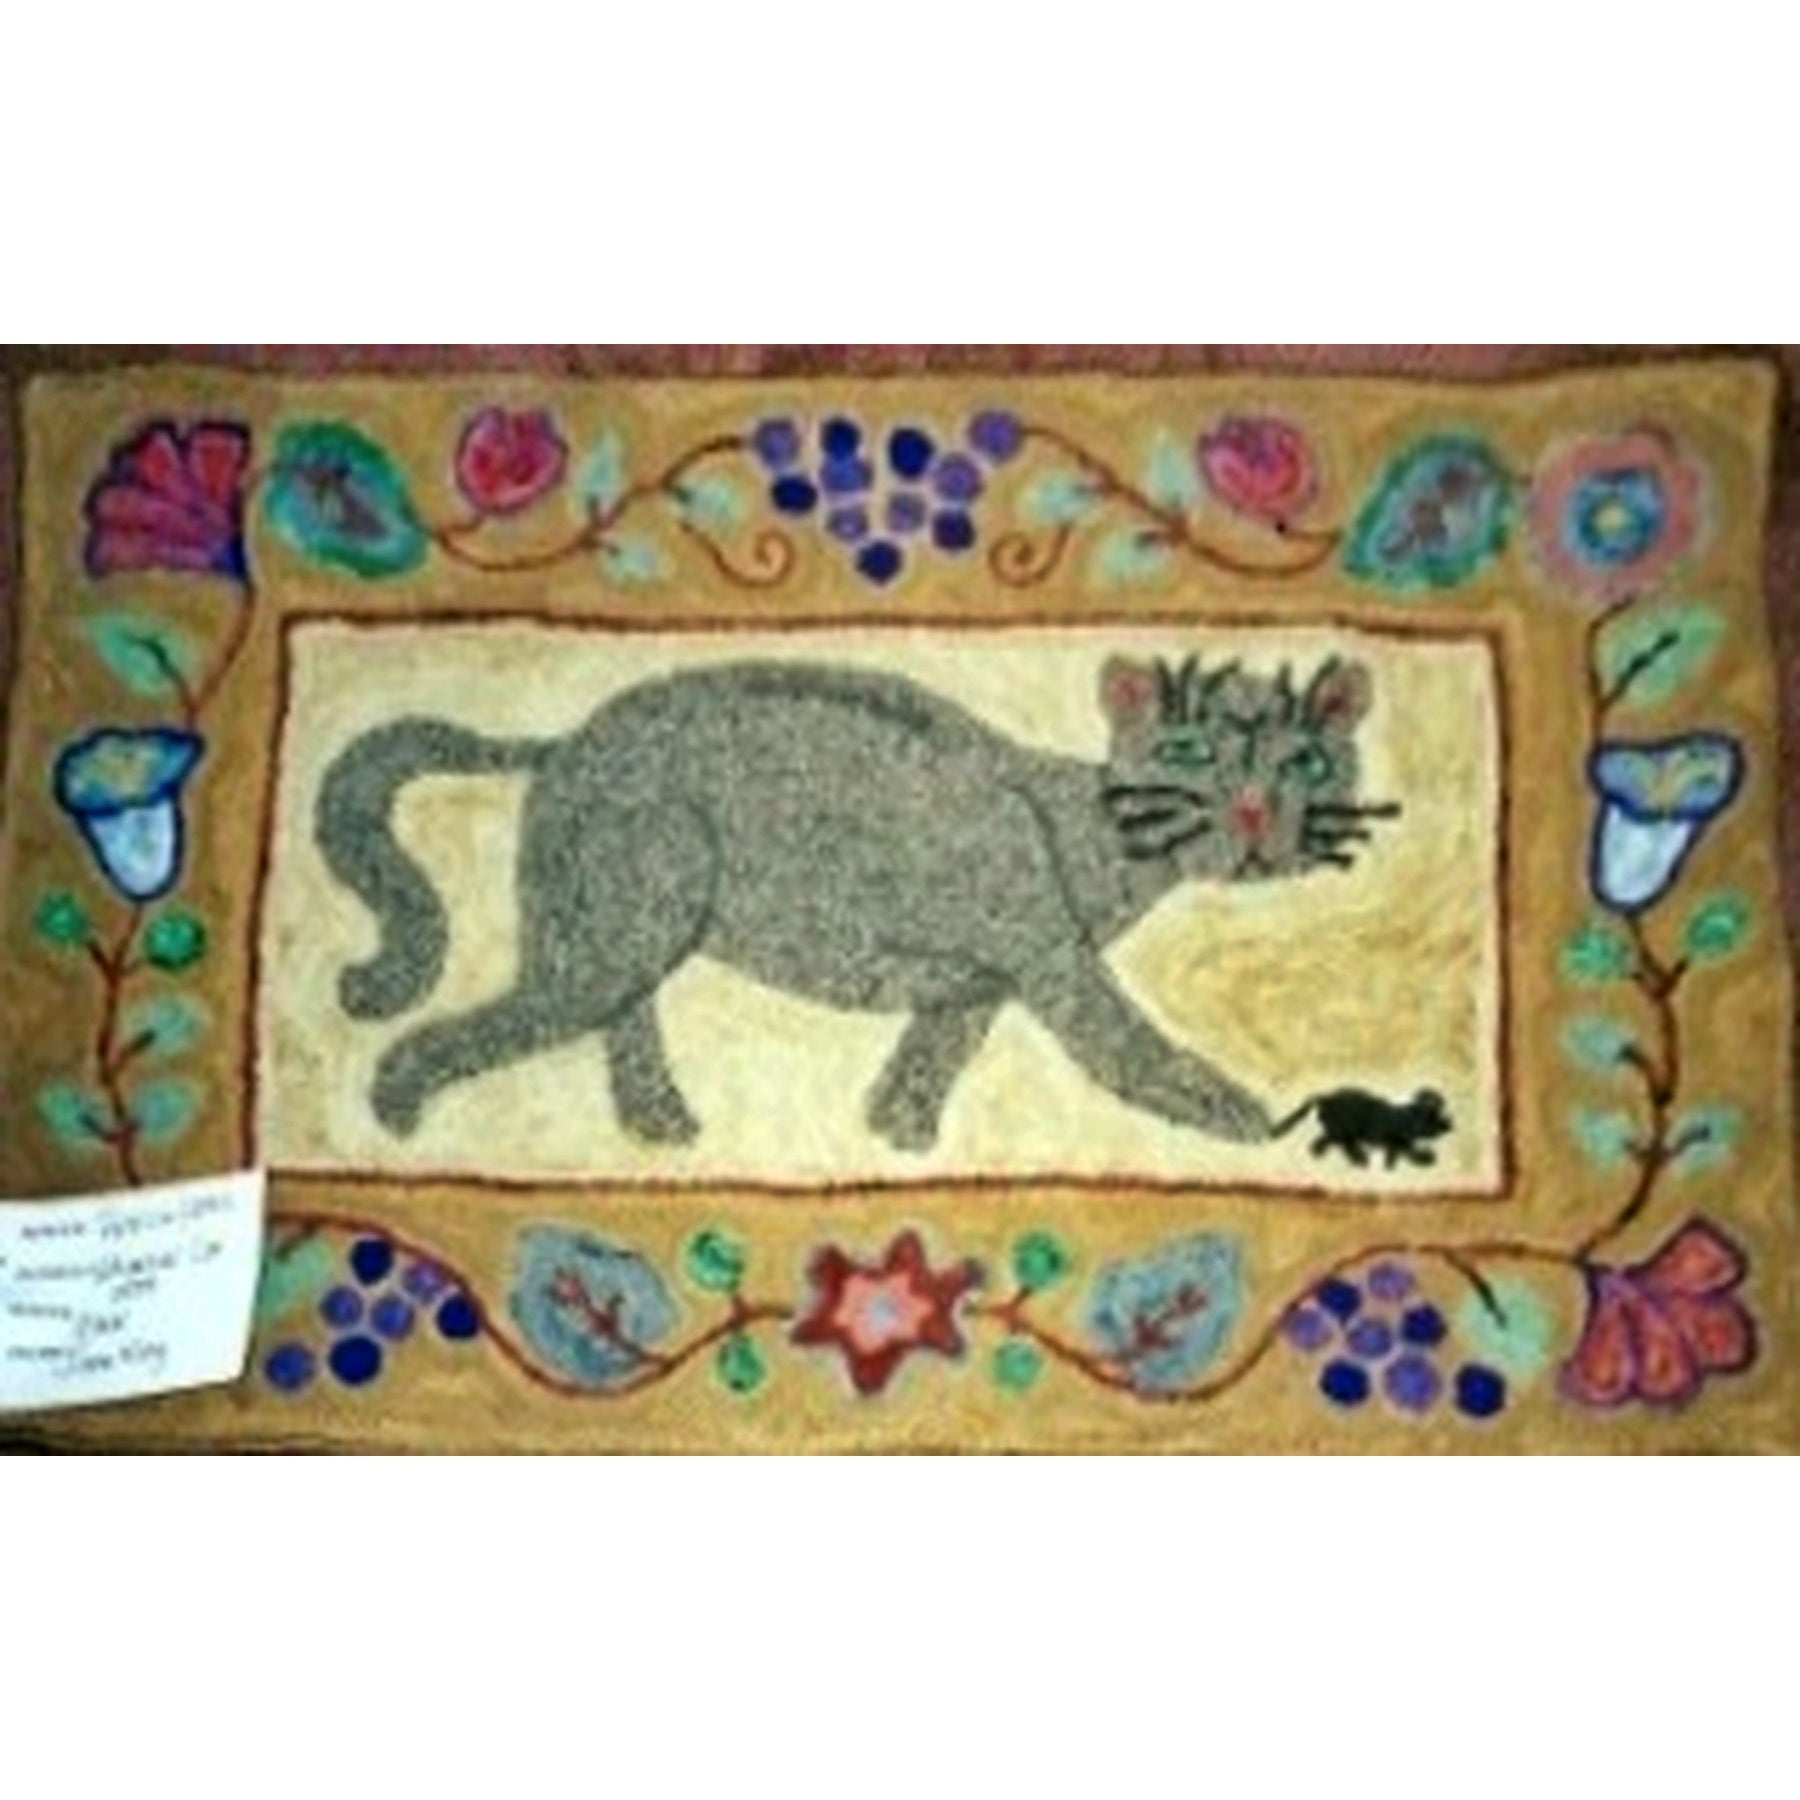 Whimsical Cat, rug hooked by Patricia Yates